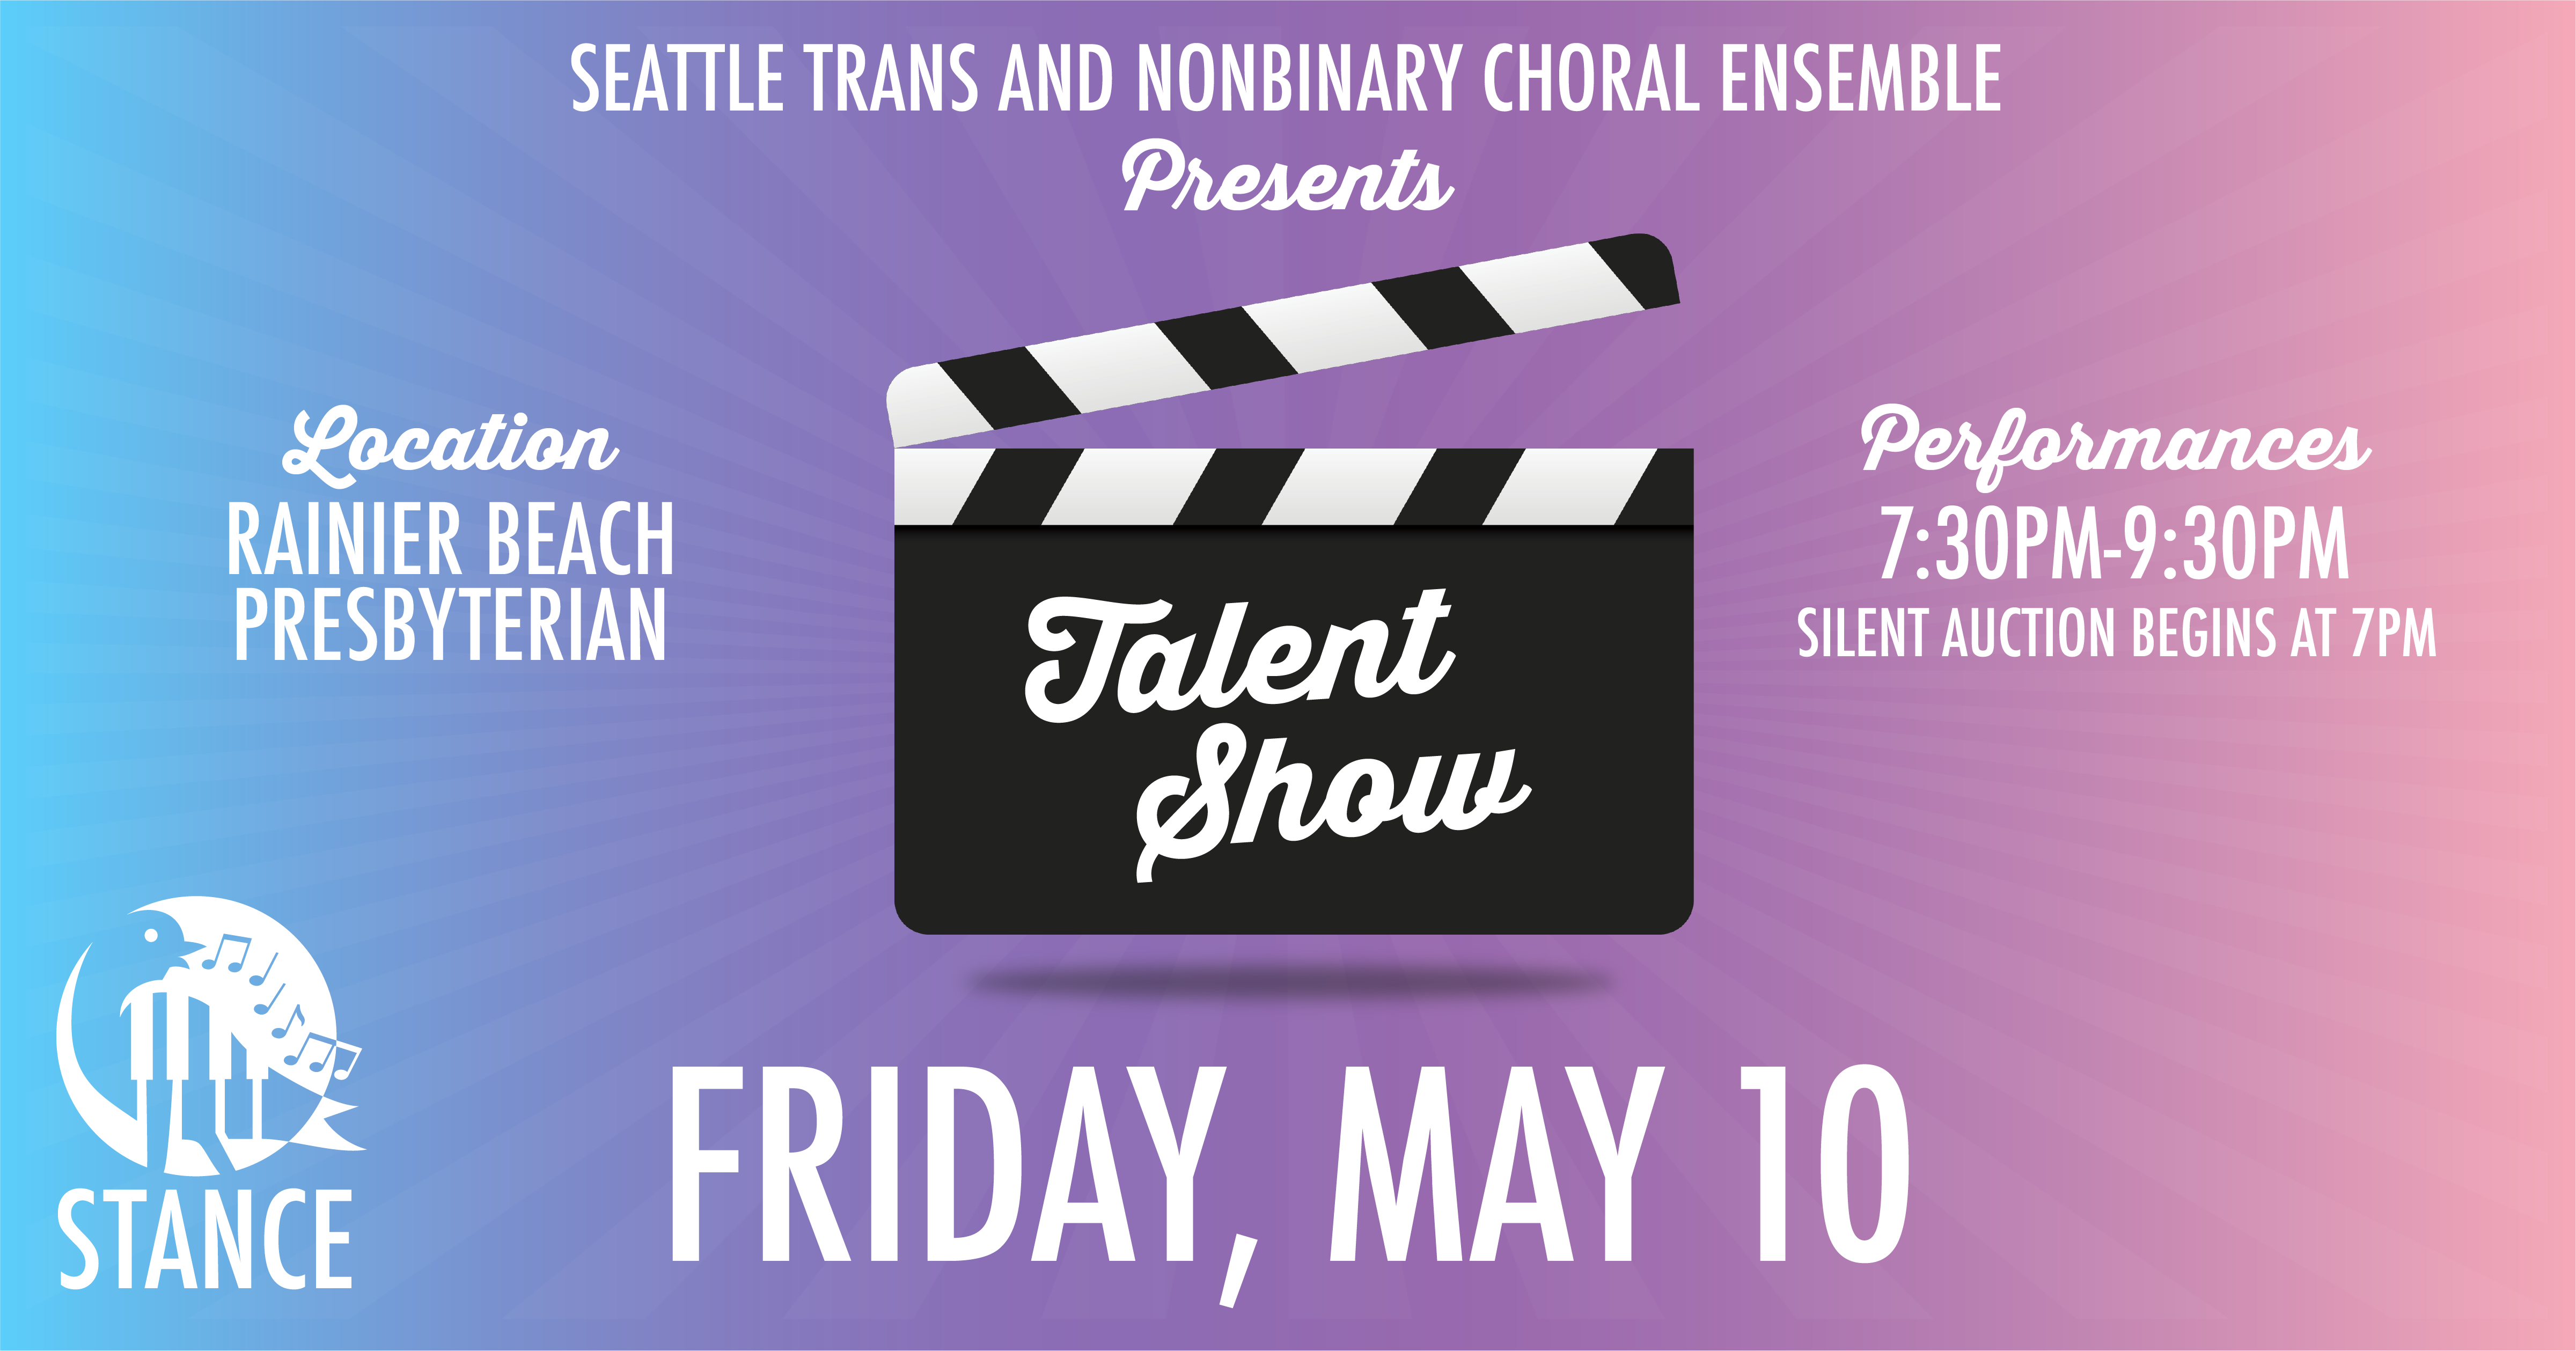 Advertising photo that says Seattle Trans and Nonbinary Choral Ensemble Talent Show, Friday, May 10